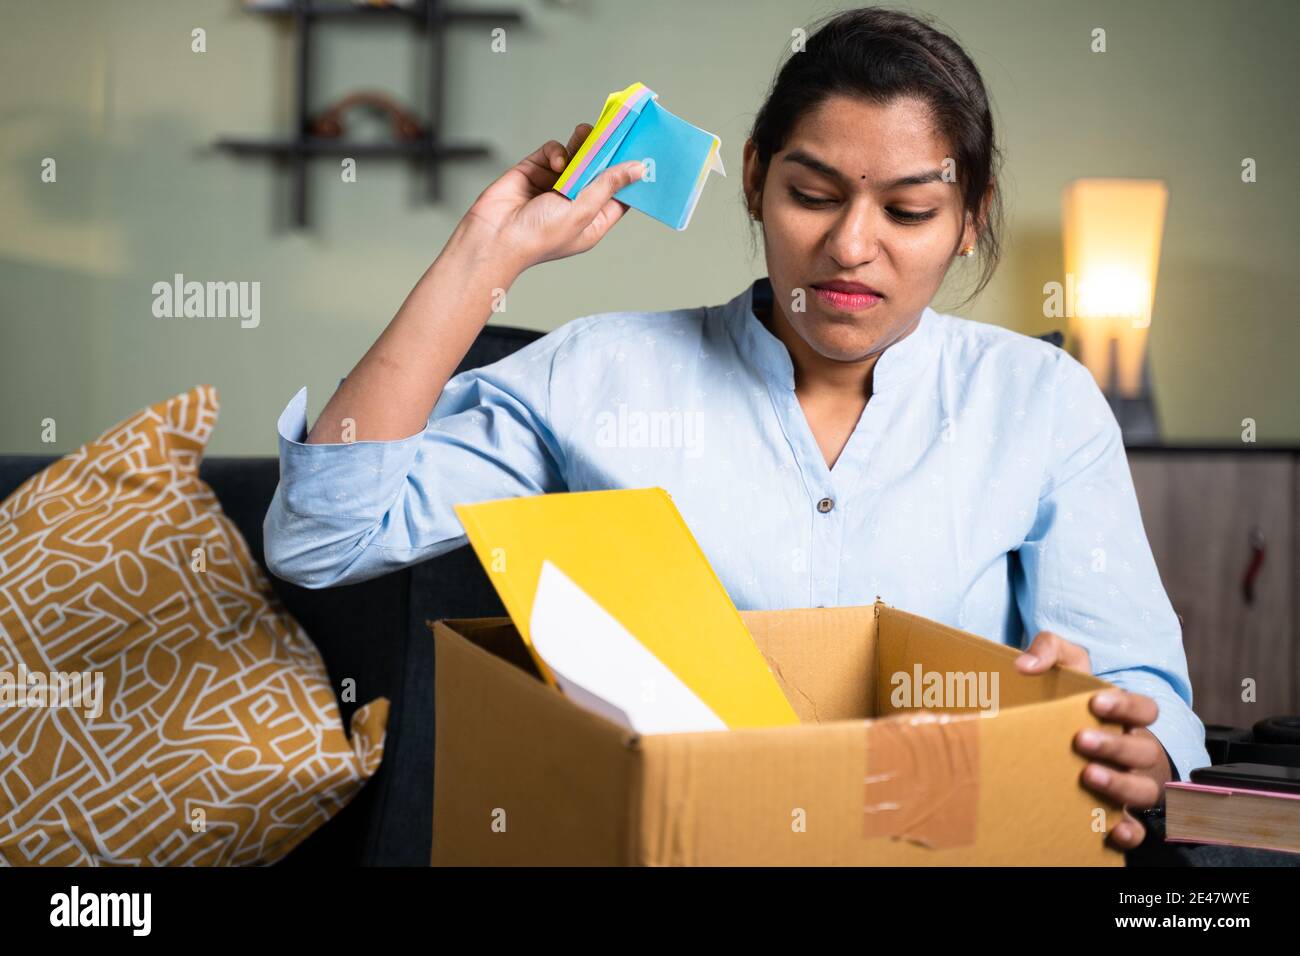 Angry business woman employee throwing sticky notes inside the box due to loss of job, fired, laid off or terminated from company without warning Stock Photo